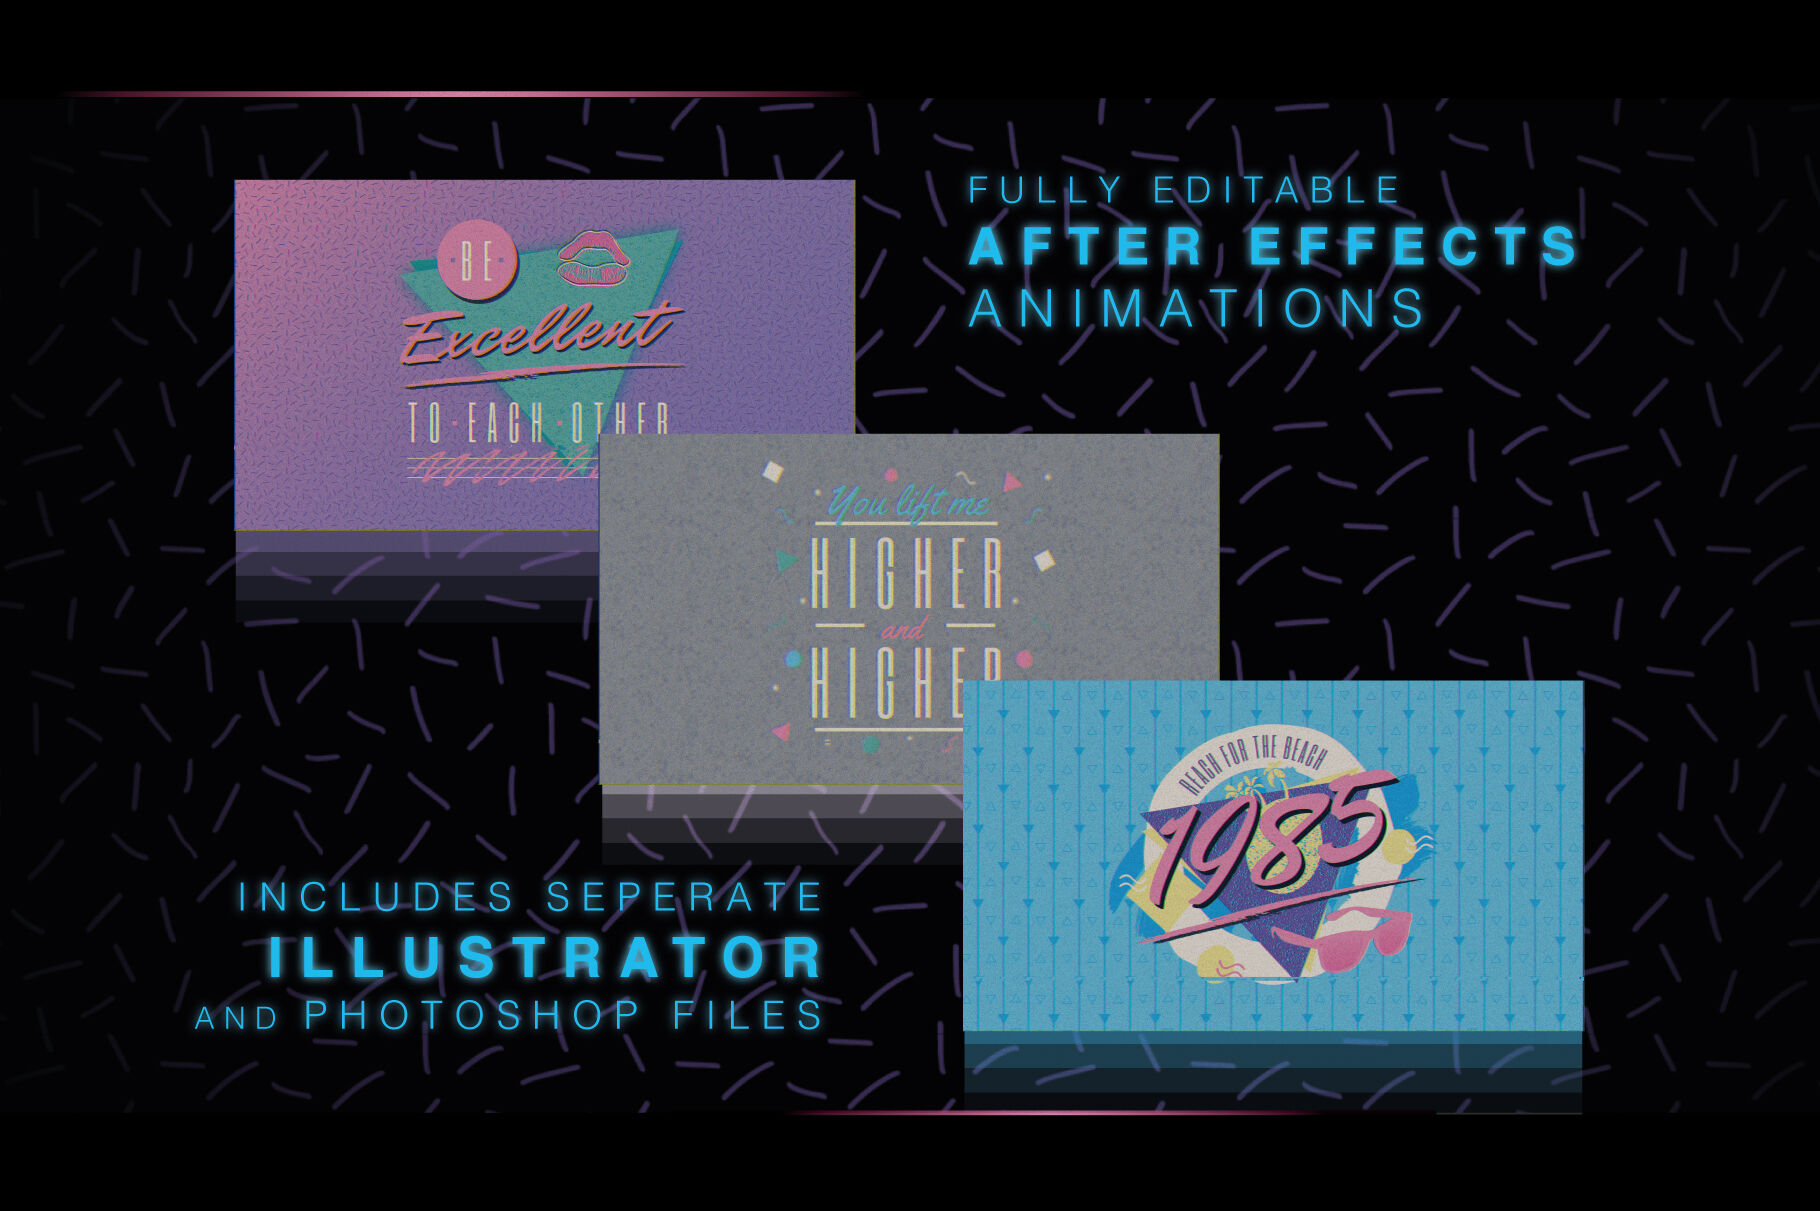 1980s Logo Animation Templates For After Effects By Wingsart Thehungryjpeg Com